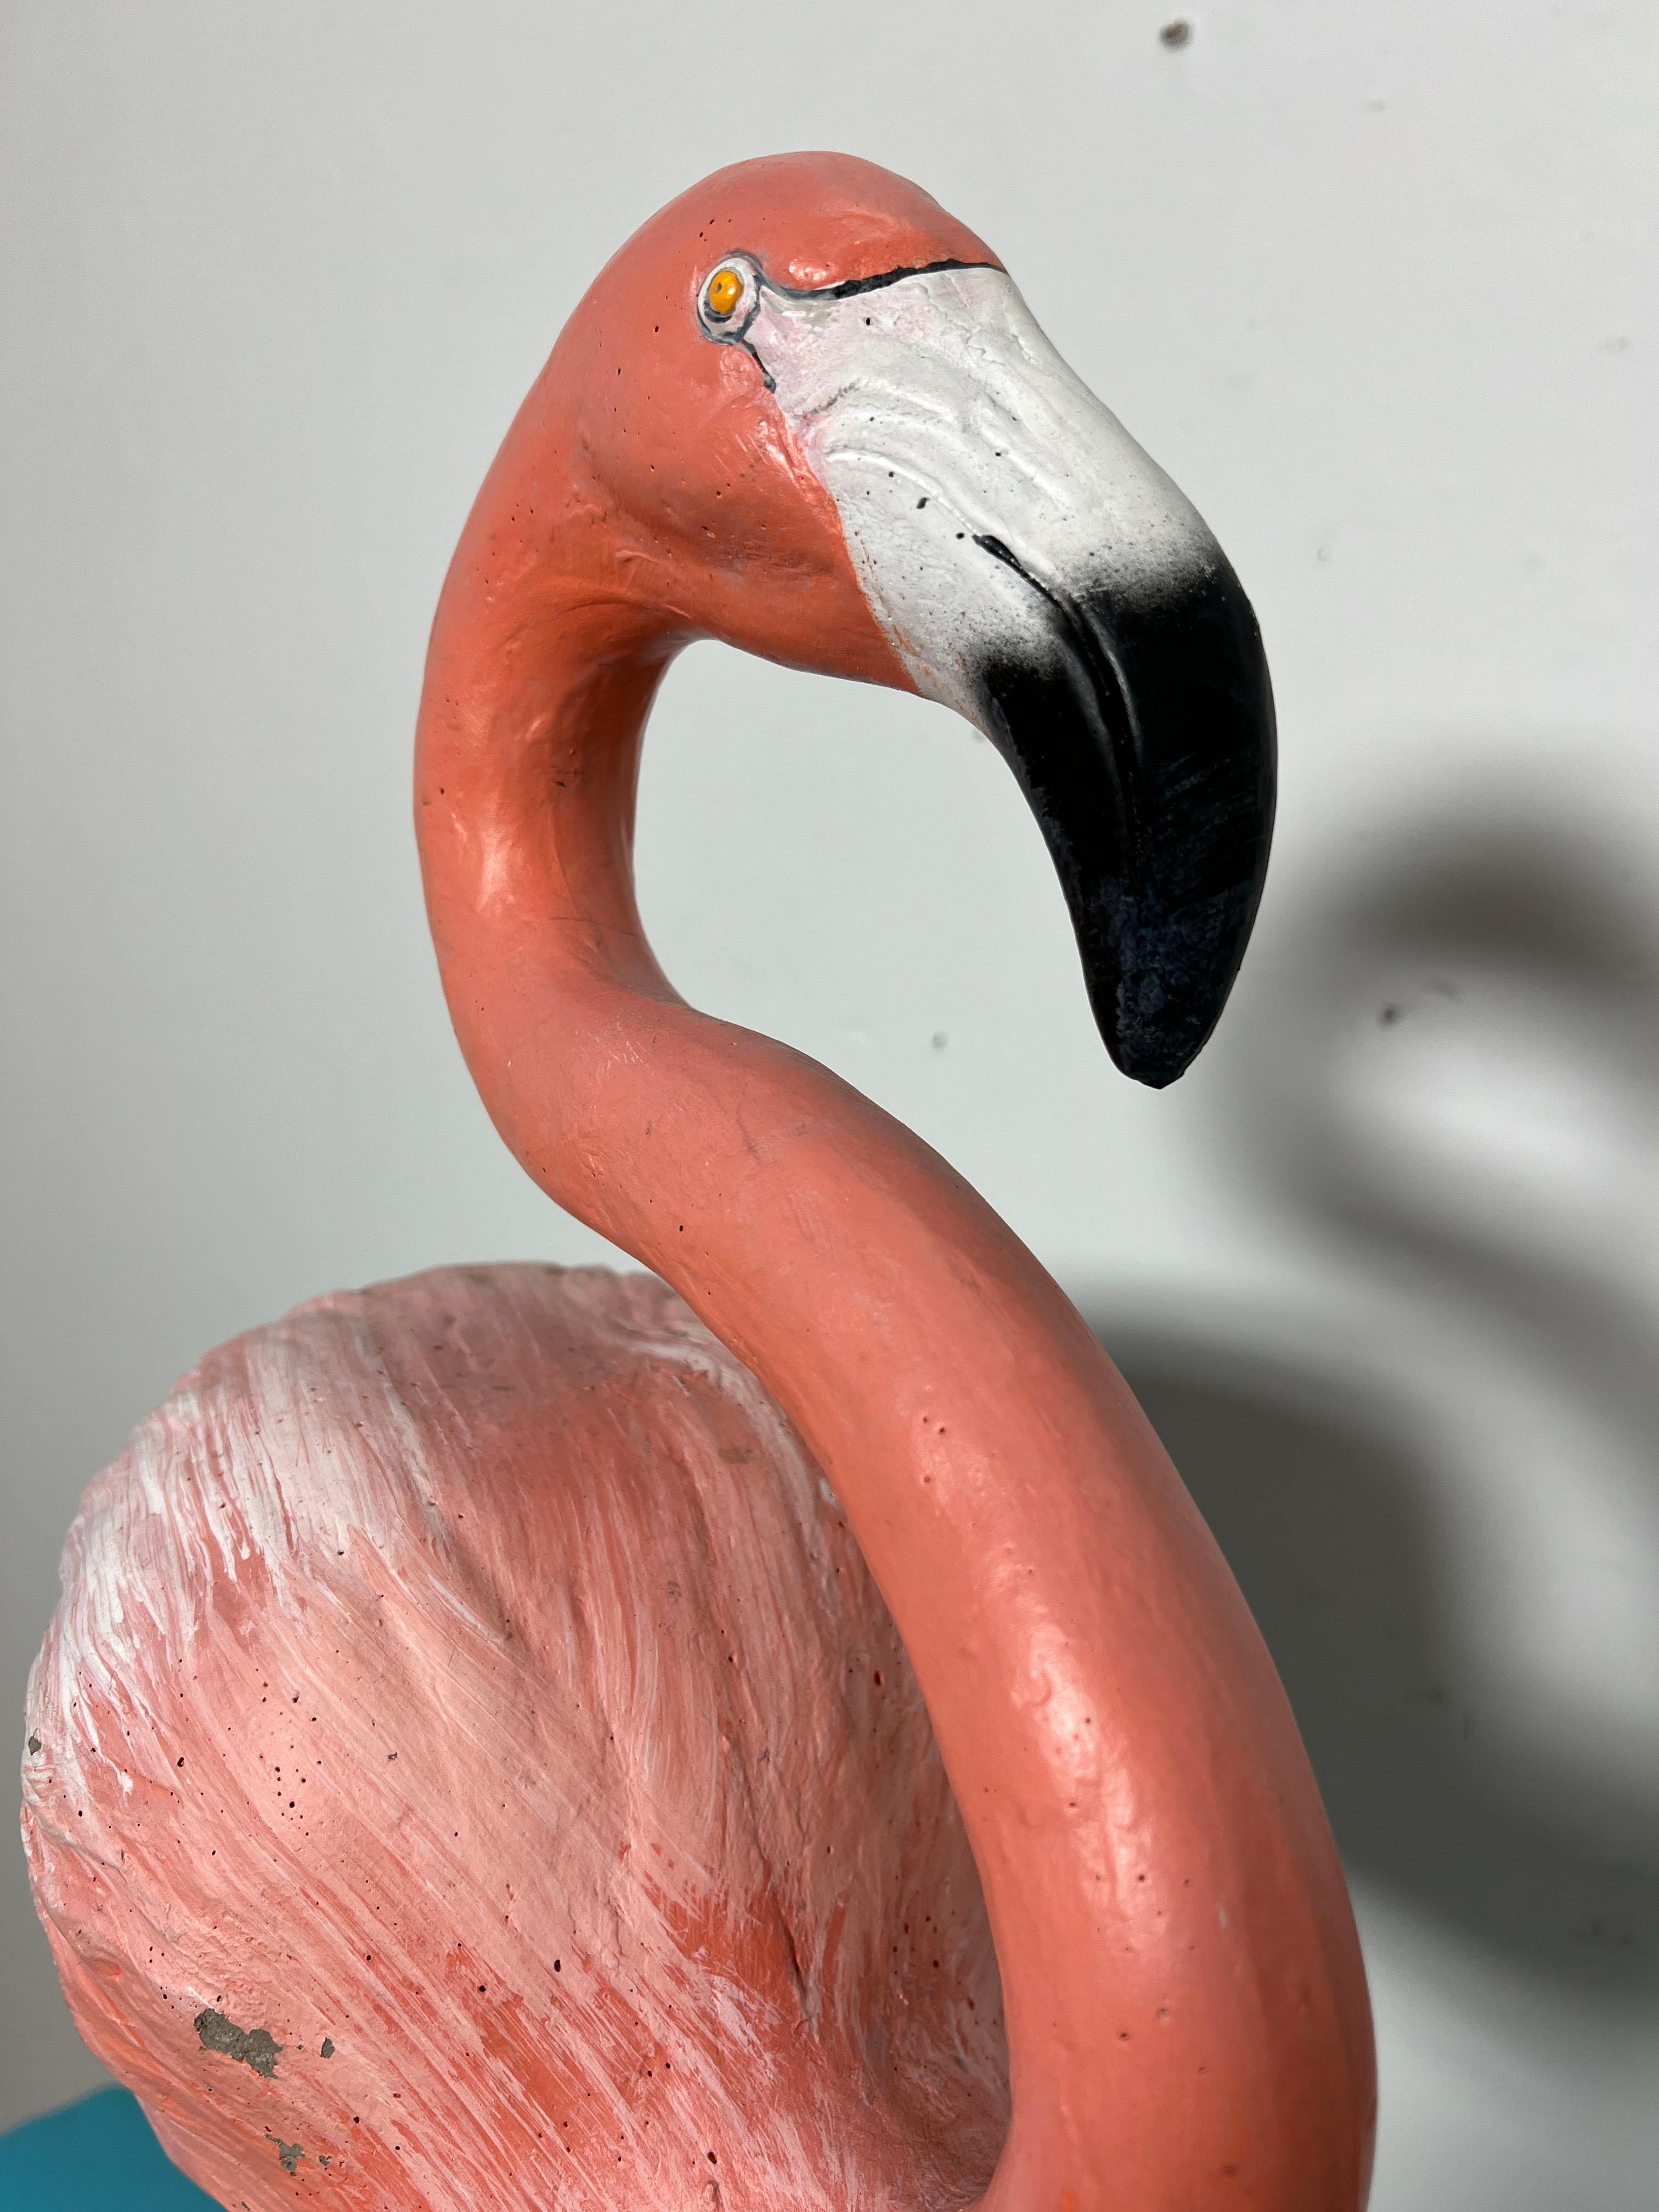 who invented the pink flamingo lawn ornament